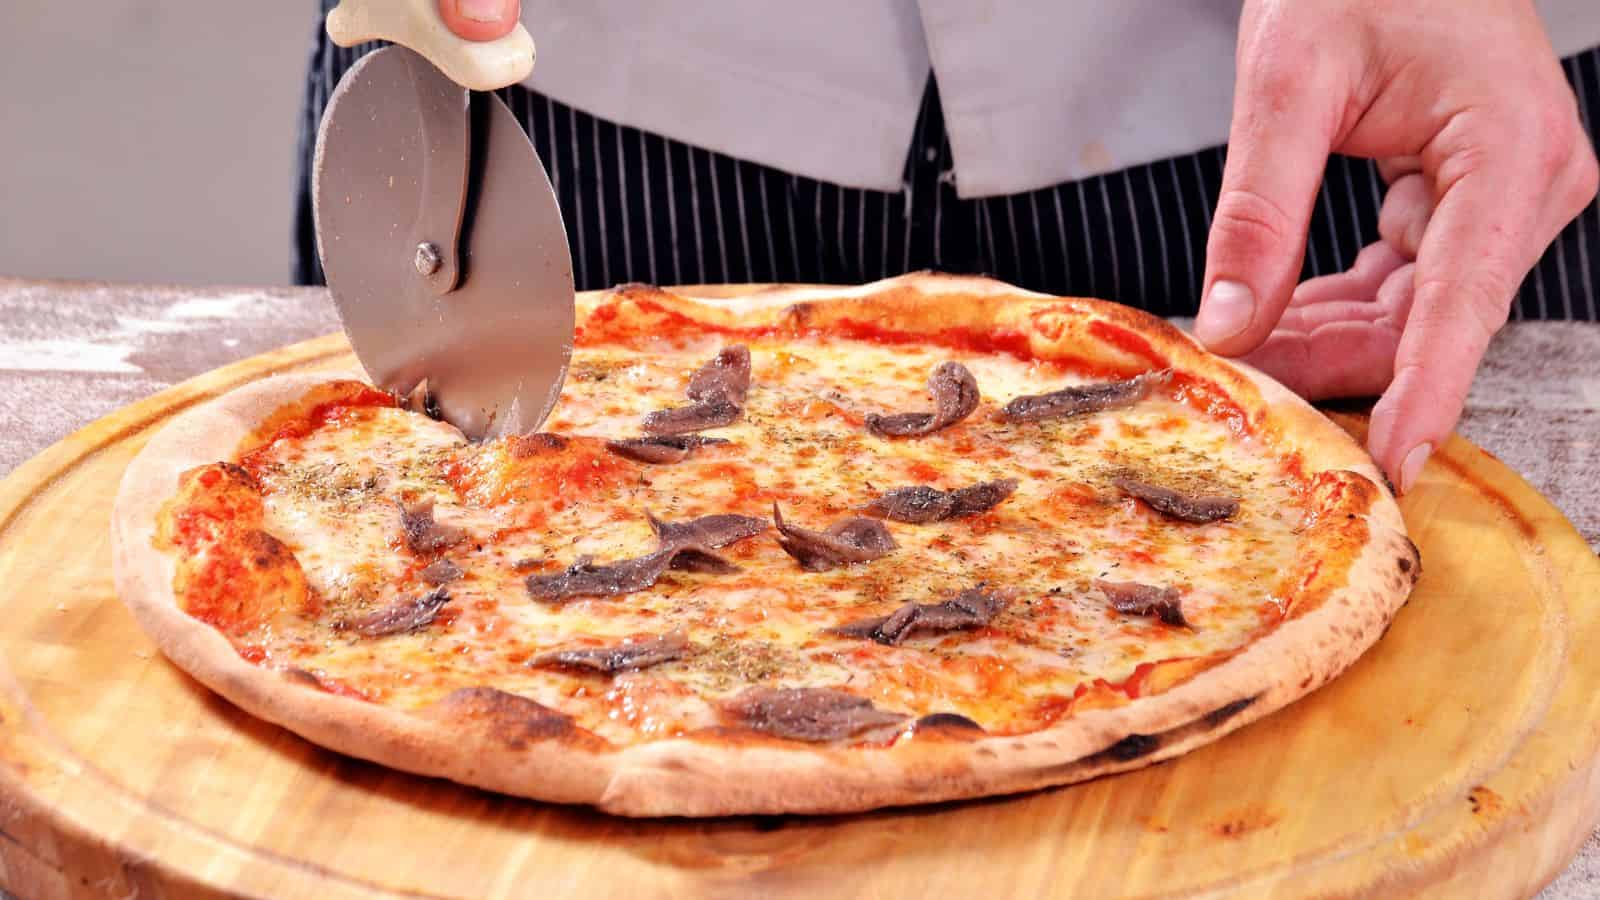 Cutting anchovy pizza.